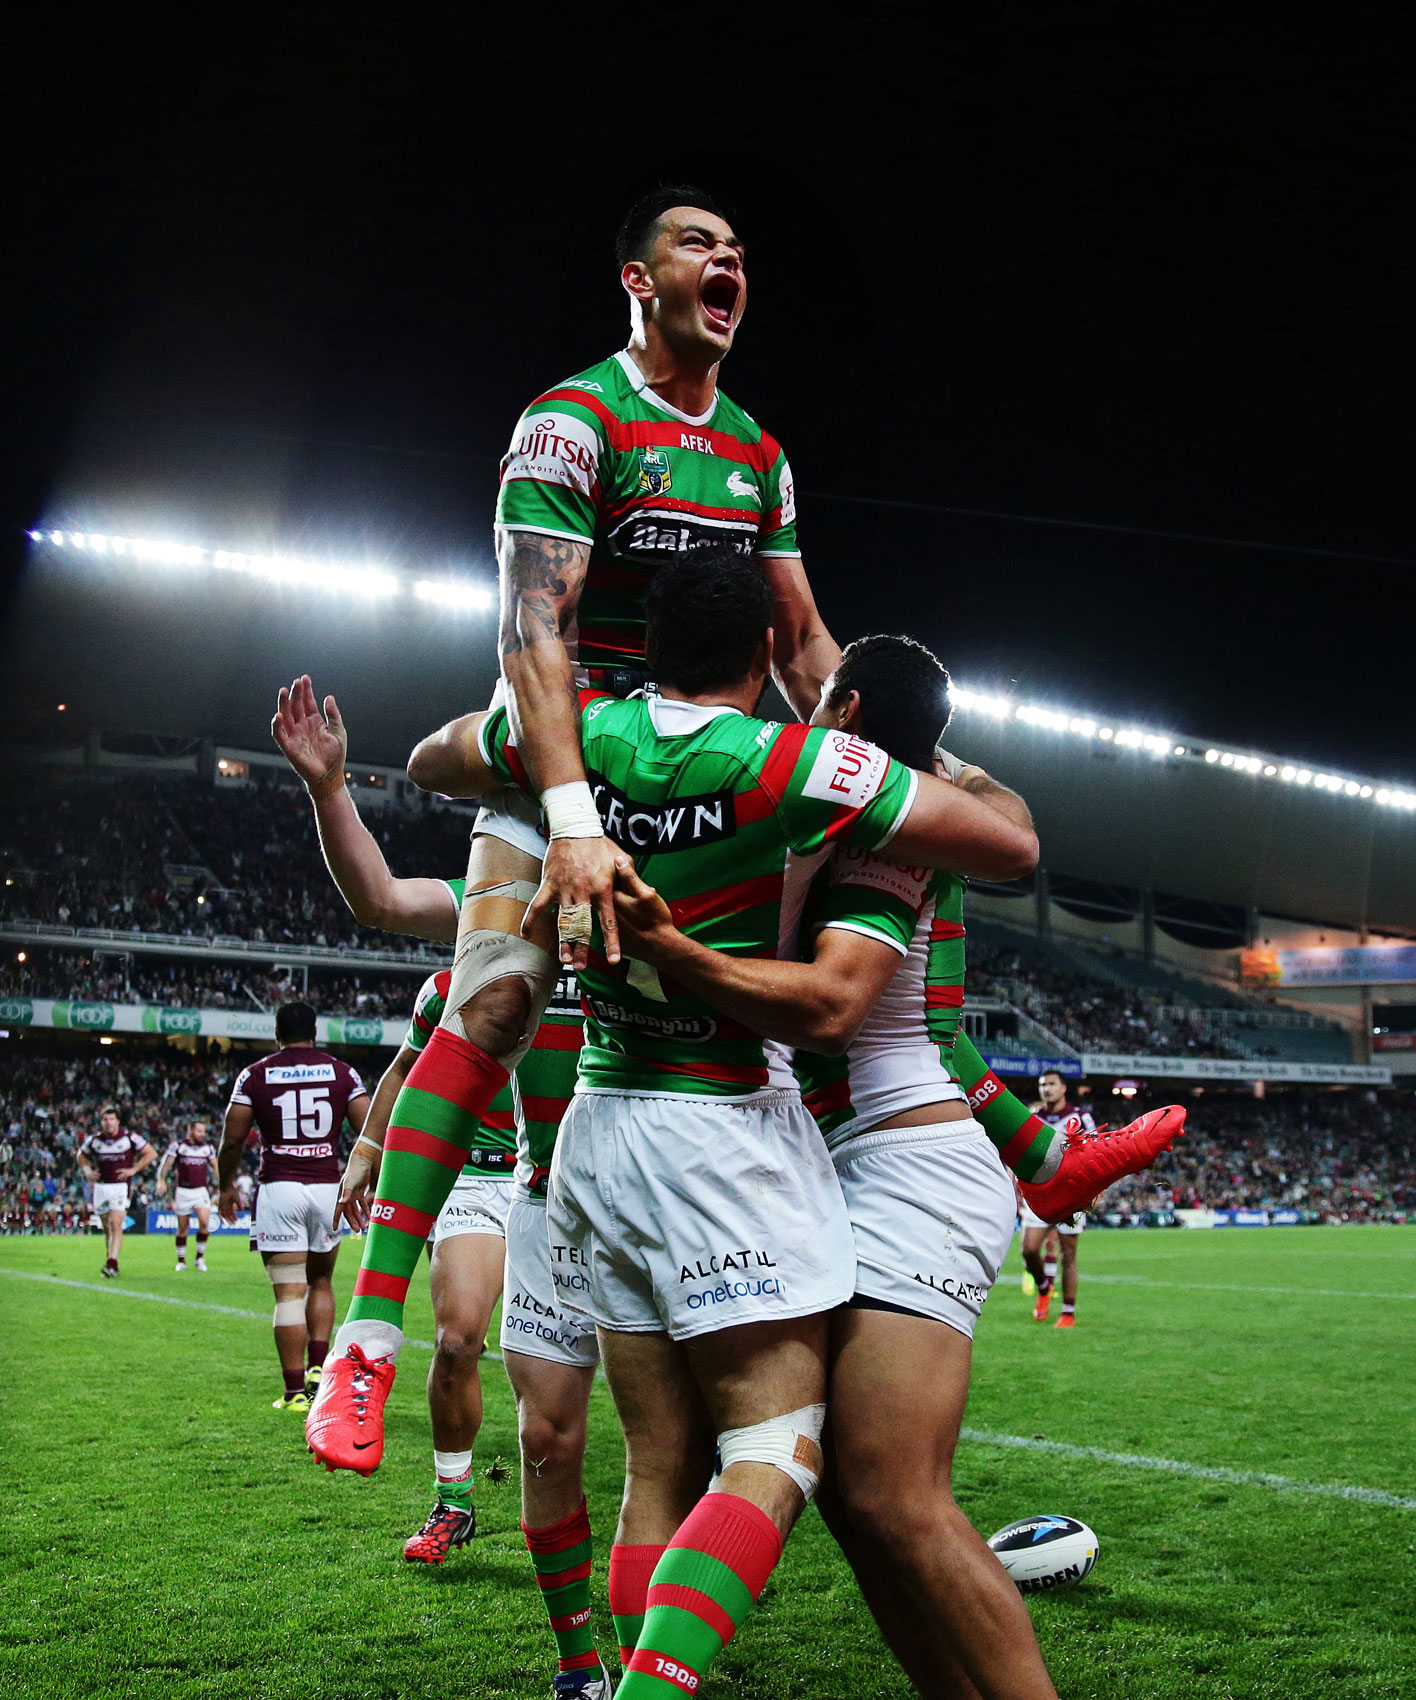 Manly vs Souths